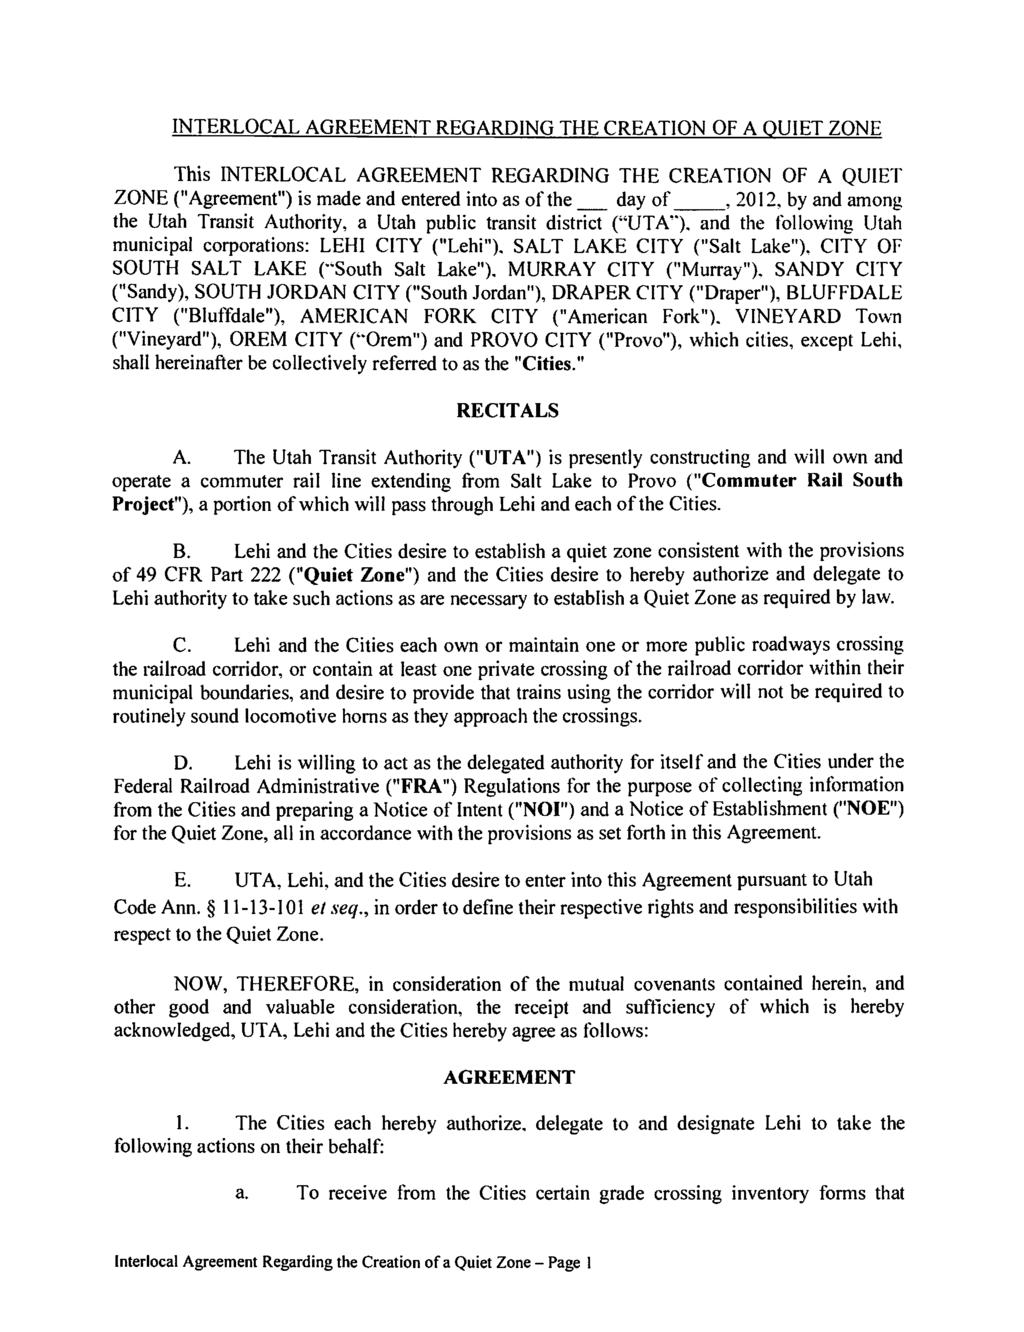 INTERLOCAL AGREEMENT REGARDING THE CREATION OF A QUIET ZONE This INTERLOCAL AGREEMENT REGARDING THE CREATION OF A QUIET ZONE ("Agreement") is made and entered into as of the day of, 2012, by and